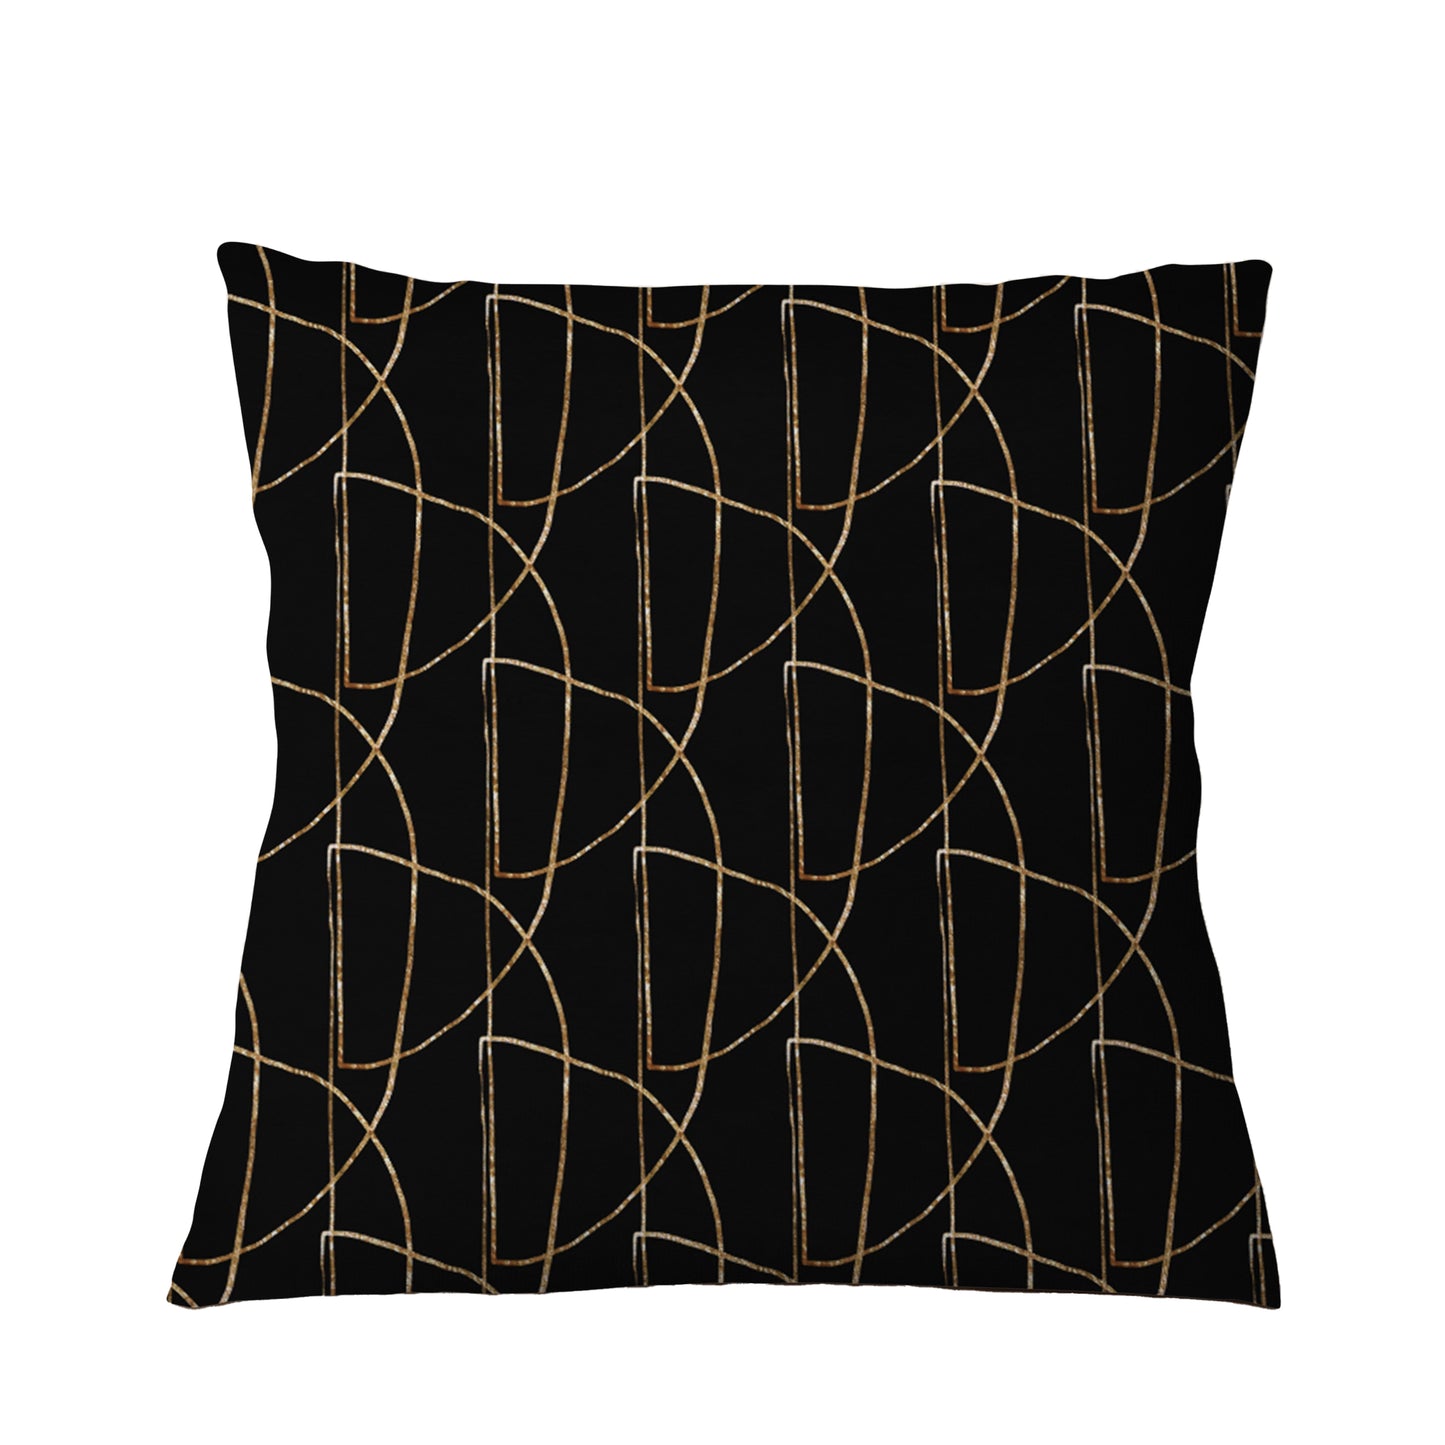 Black Gold Pattern Pillow Cushion & Cover, Abstract Decorative Pillow, Sofa Living Room Bedroom Decor